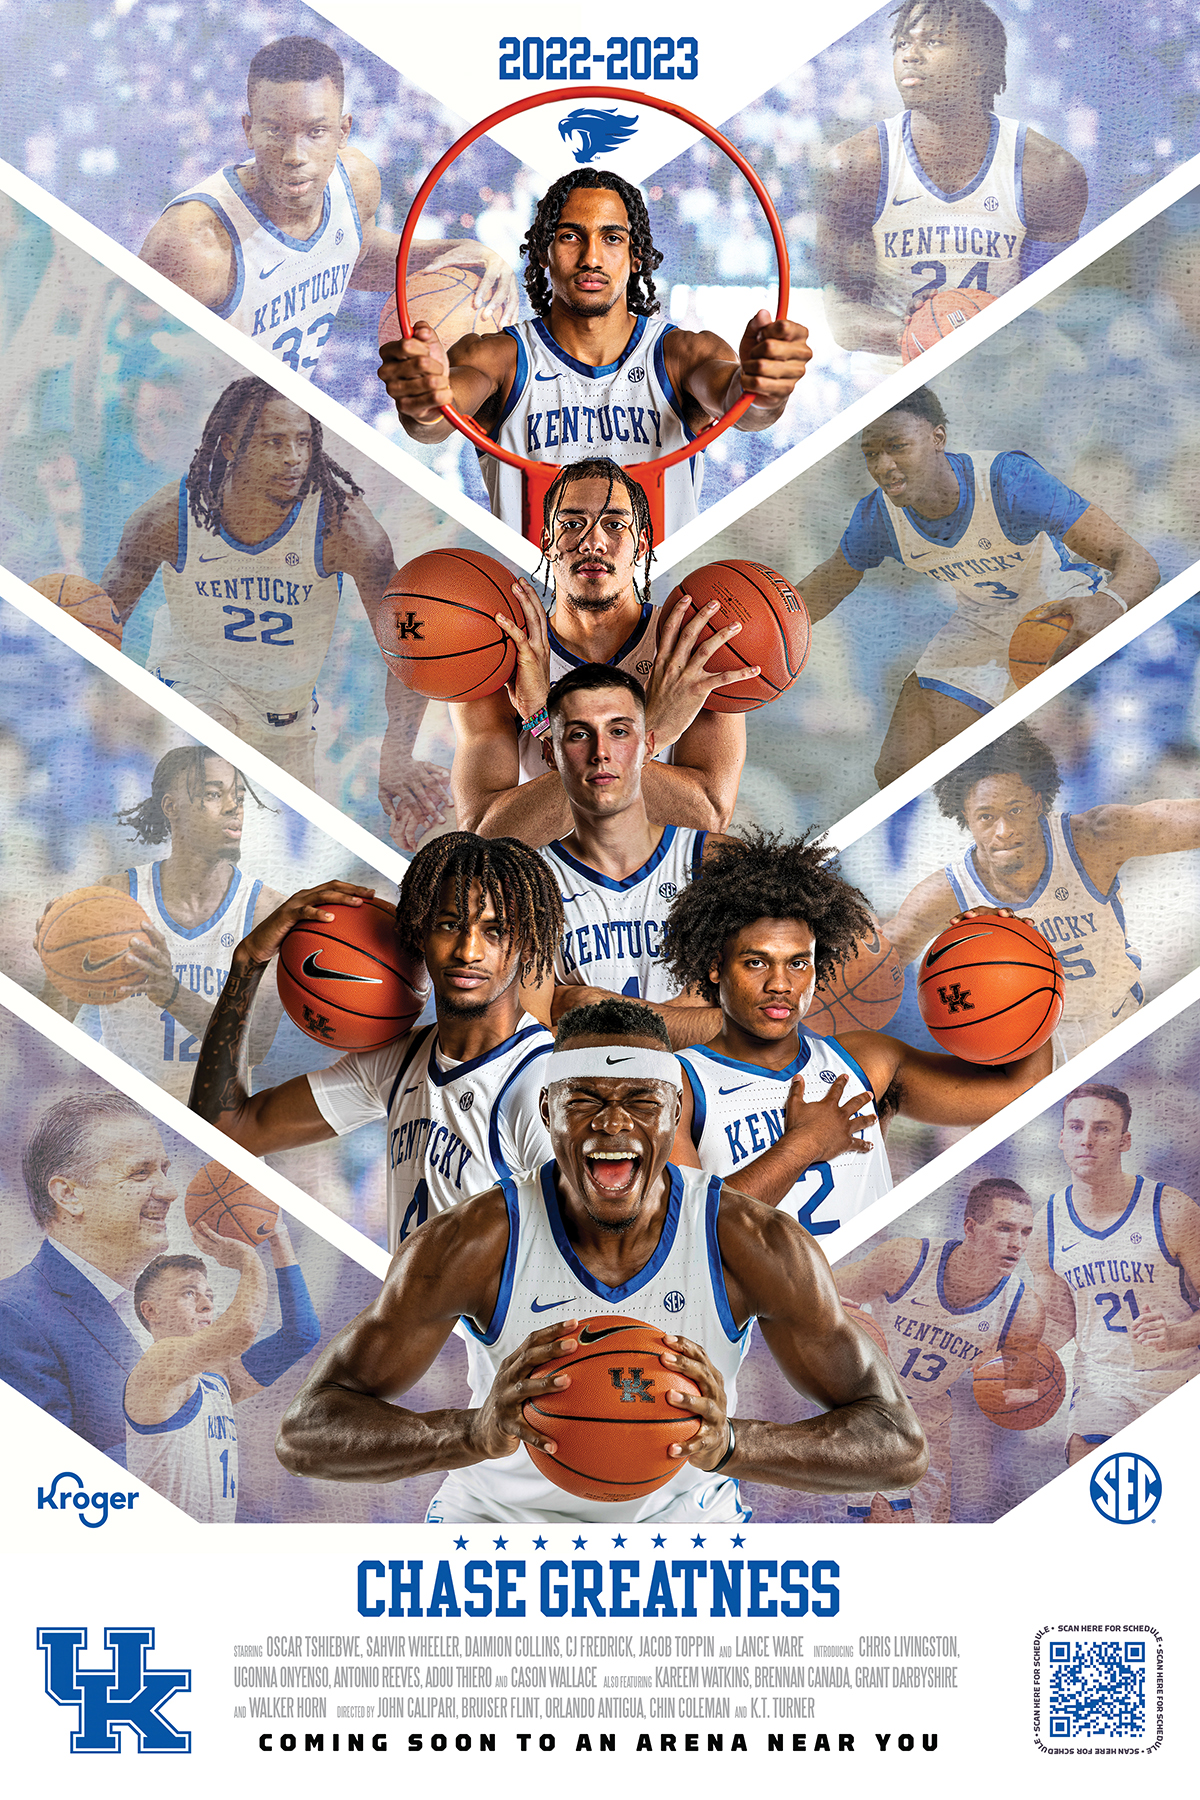 2022-23 Kentucky Men's and Women's Basketball Posters Unveiled